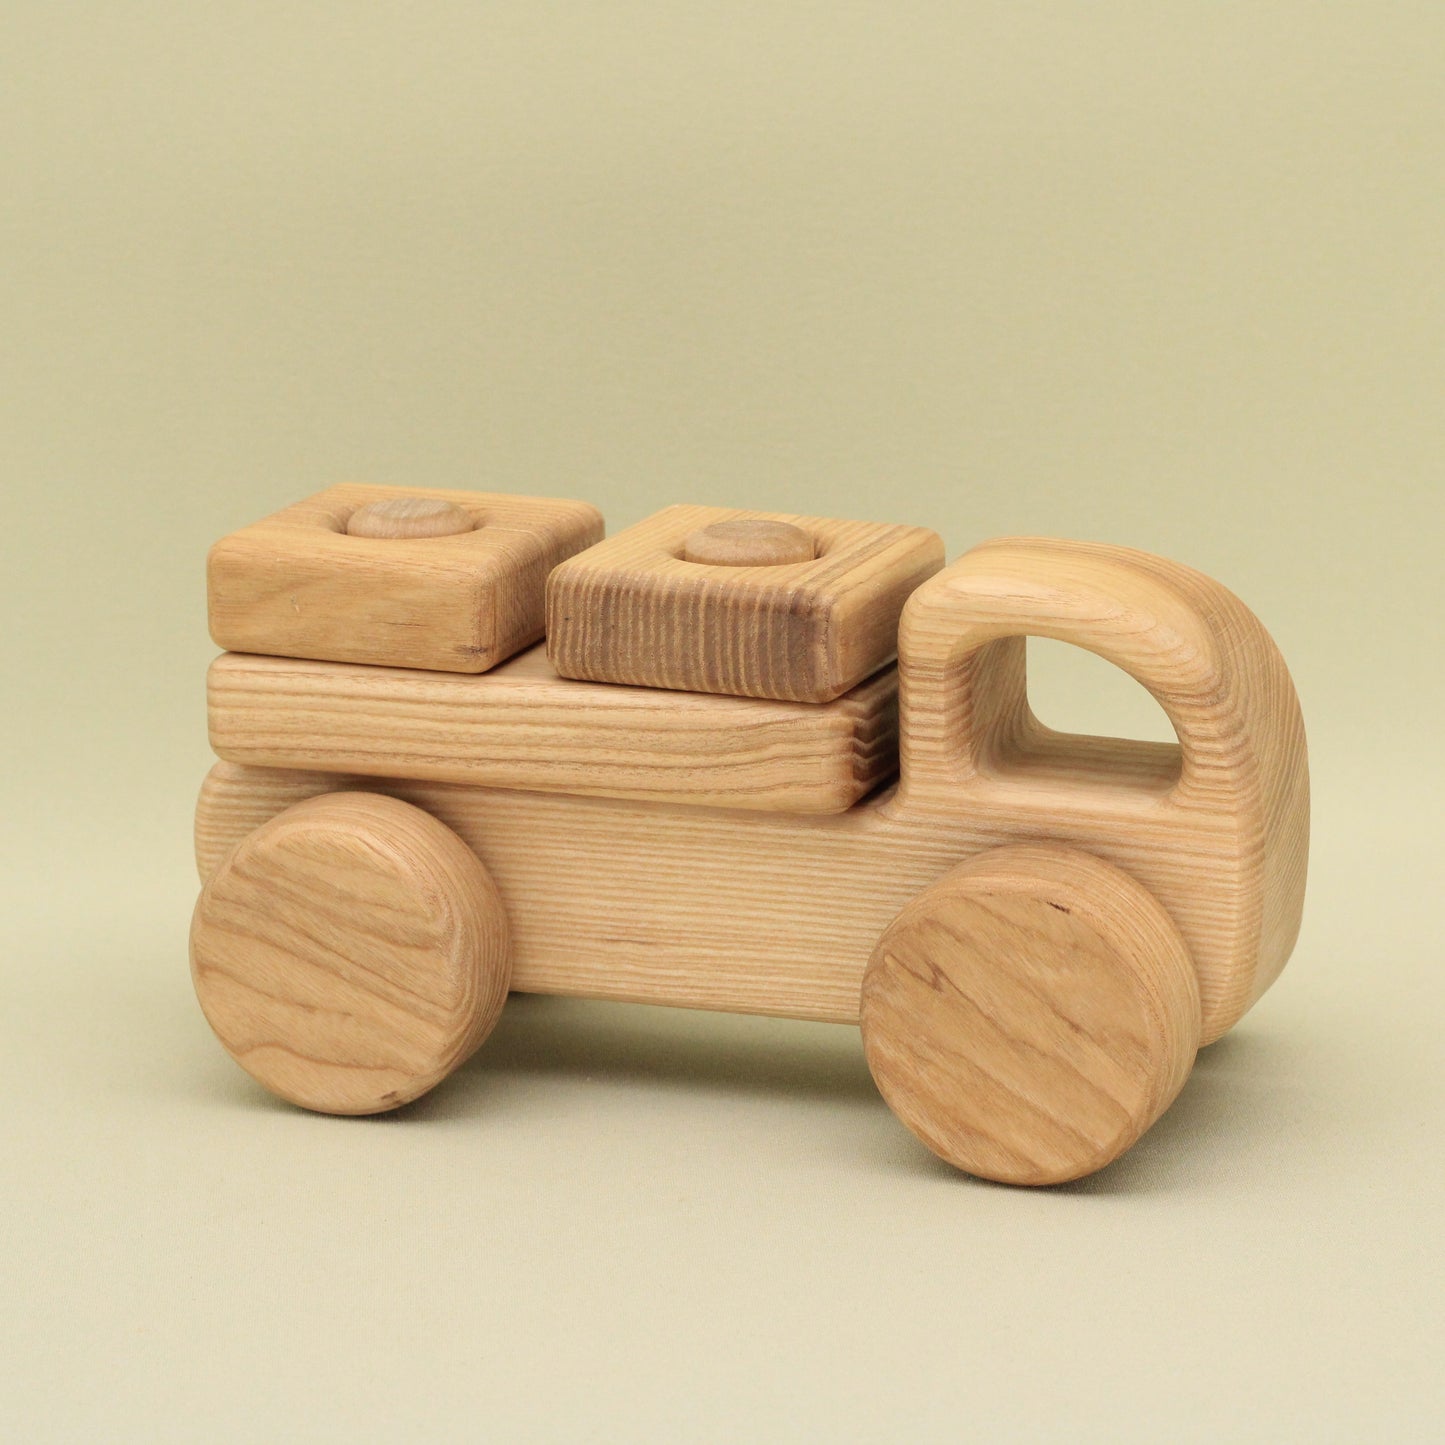 Lotes Toys Wooden Construction Vehicles Car BT71